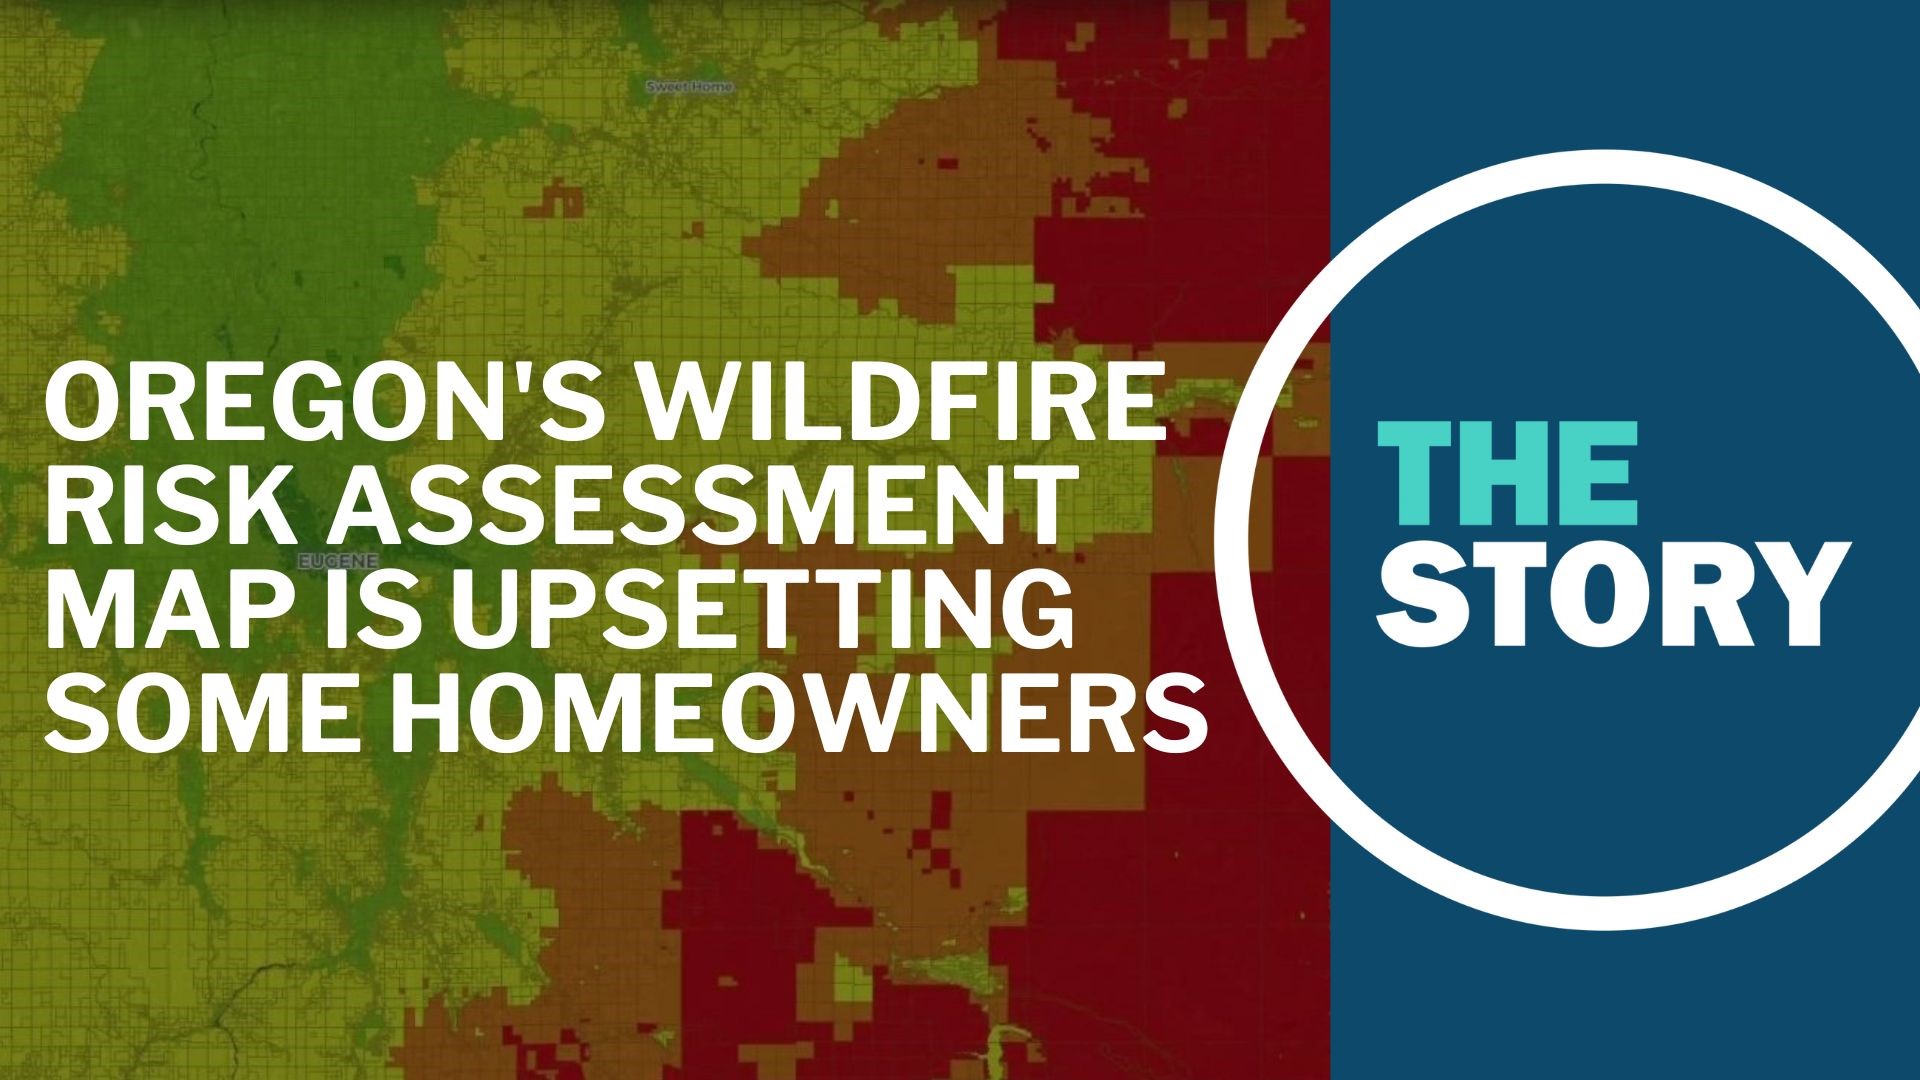 Many homeowners in rural Oregon are upset after the state put out a wildfire risk assessment map, saying their insurance skyrocketed because of it.